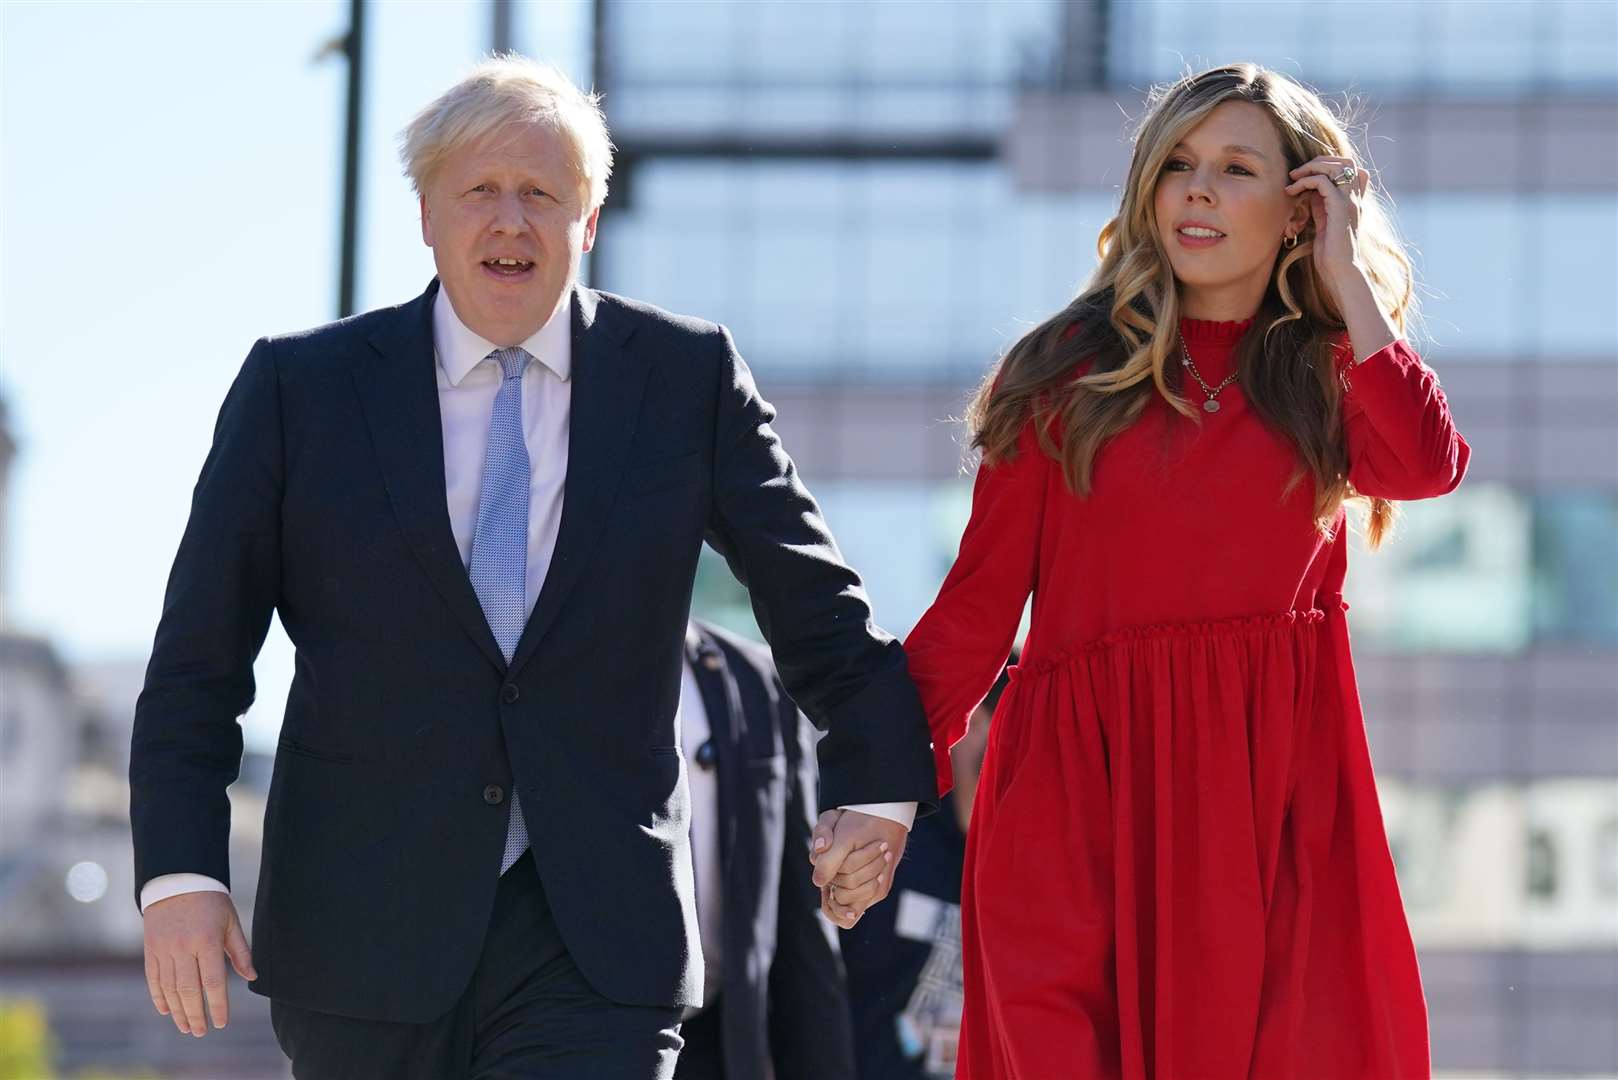 Boris Johnson and his wife Carrie were both fined for breaking Covid rules during a birthday celebration for the PM (Jacob King/PA)